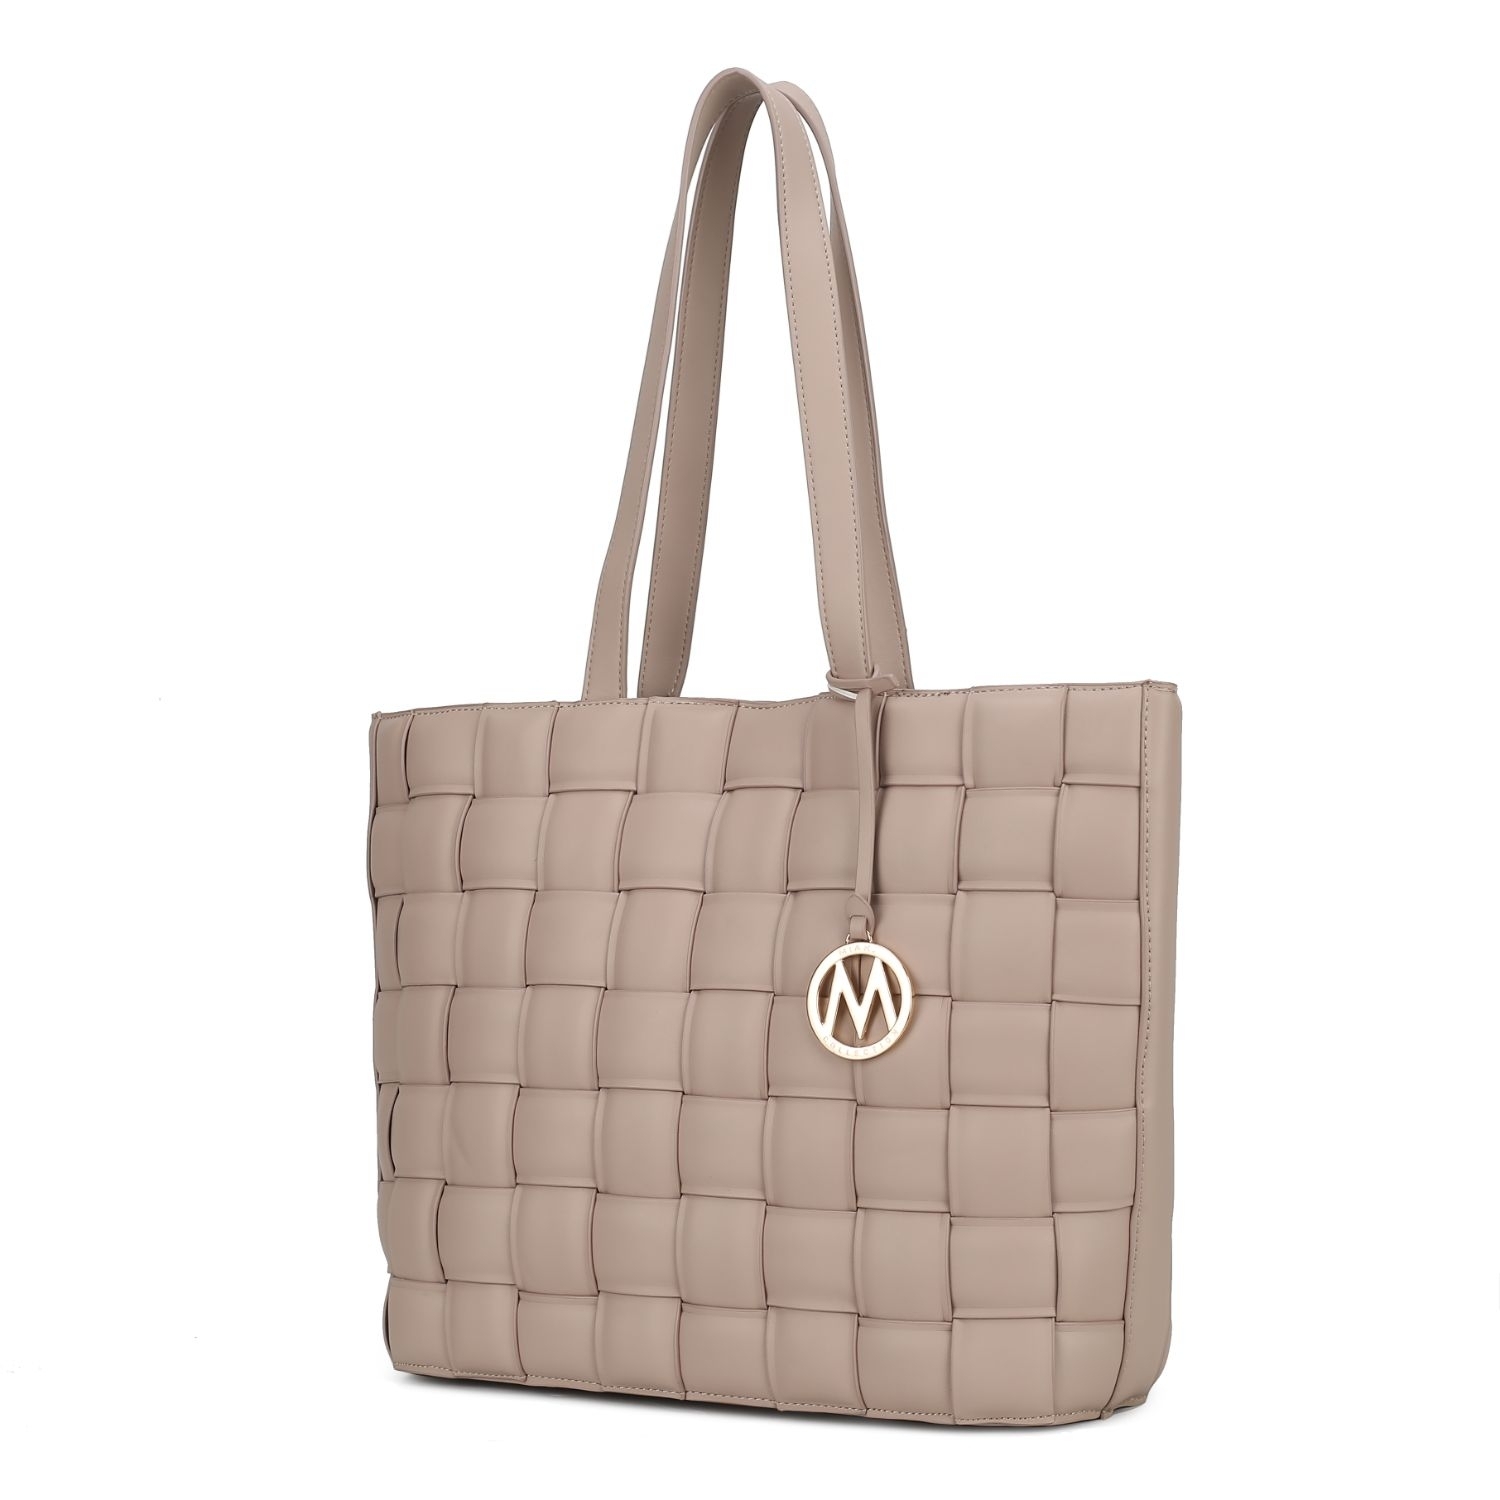 MKF Collection Rowan Woven Vegan Leather Women's Tote Bag By Mia K - Taupe